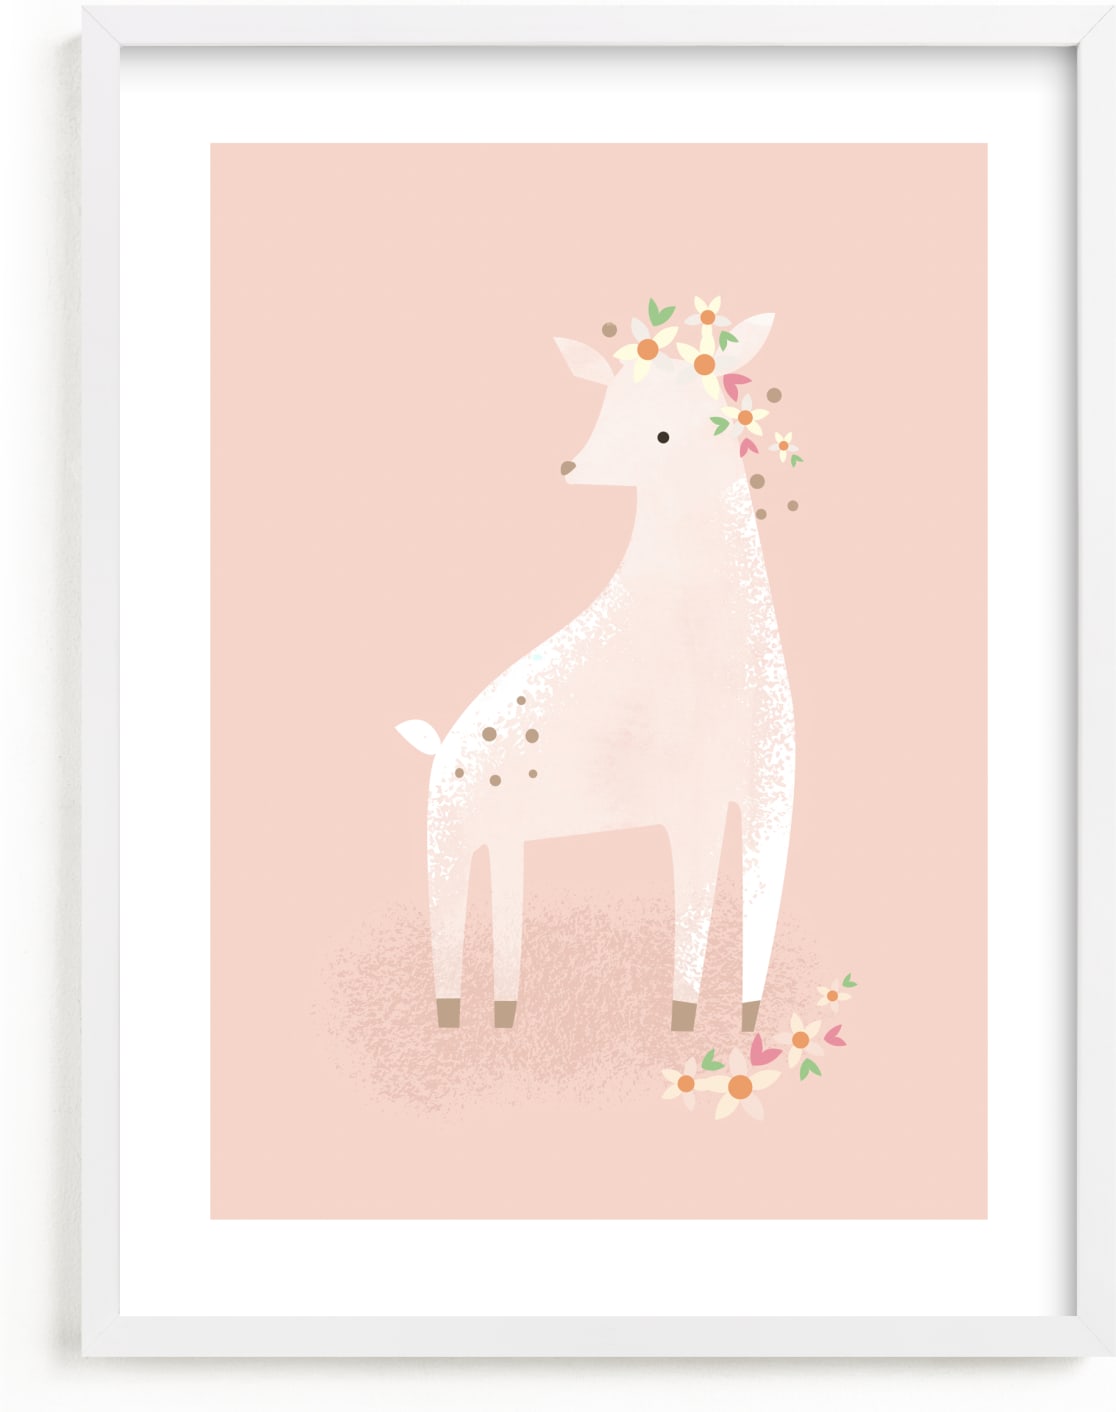 This is a pink kids wall art by Lori Wemple called Little Deer.